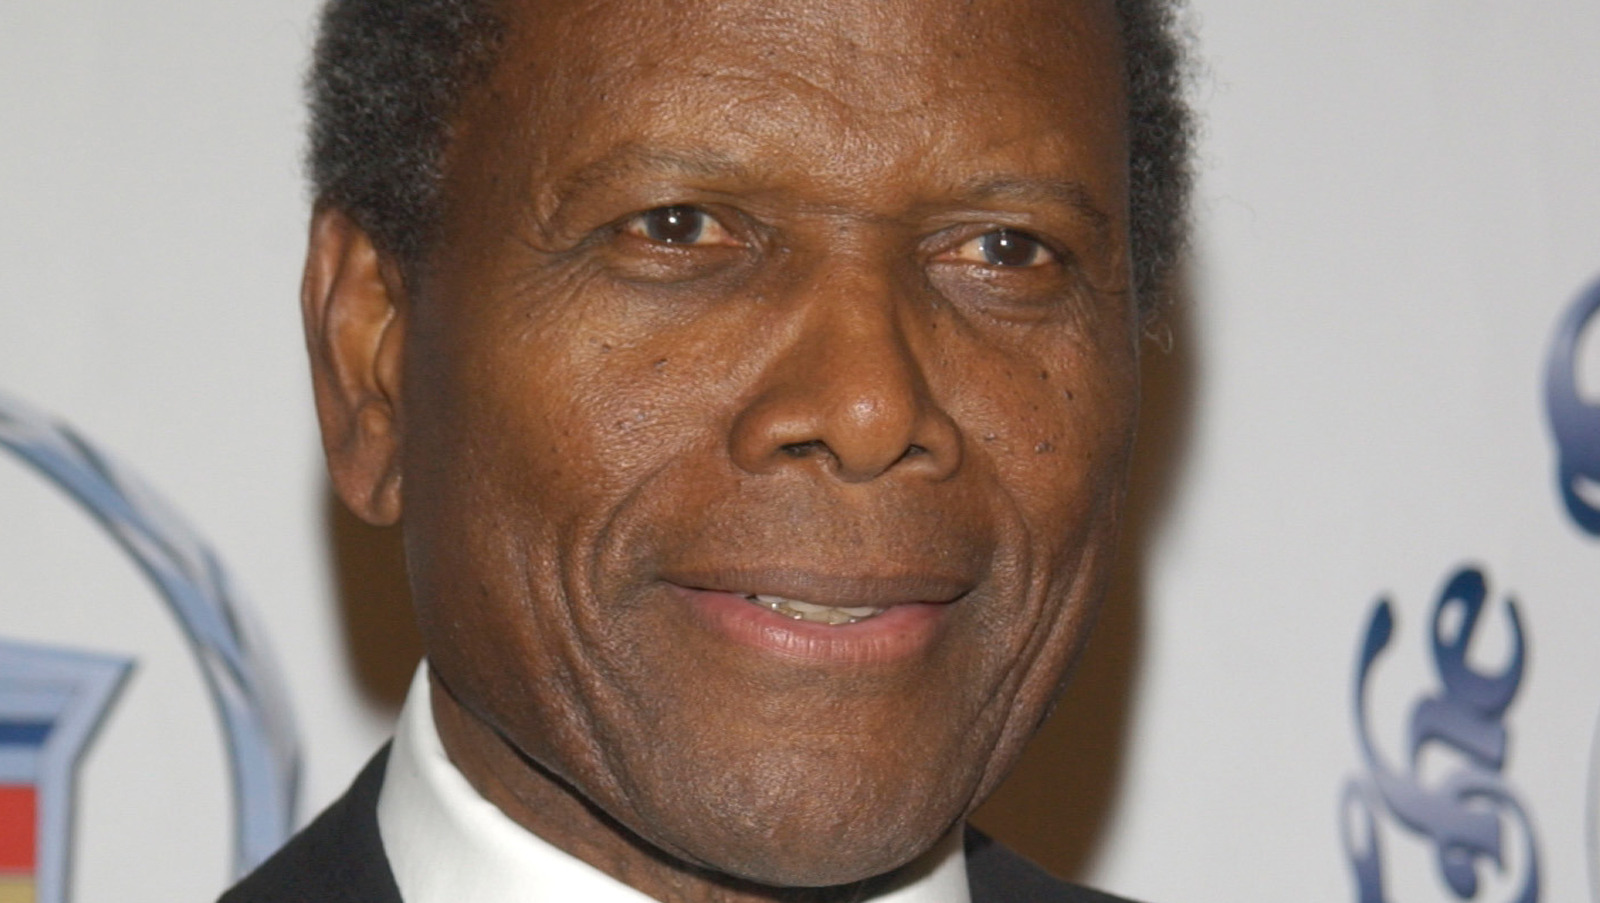 Sidney Poitier’s Daughter recollects her Dad’s best qualities in a moving tribute